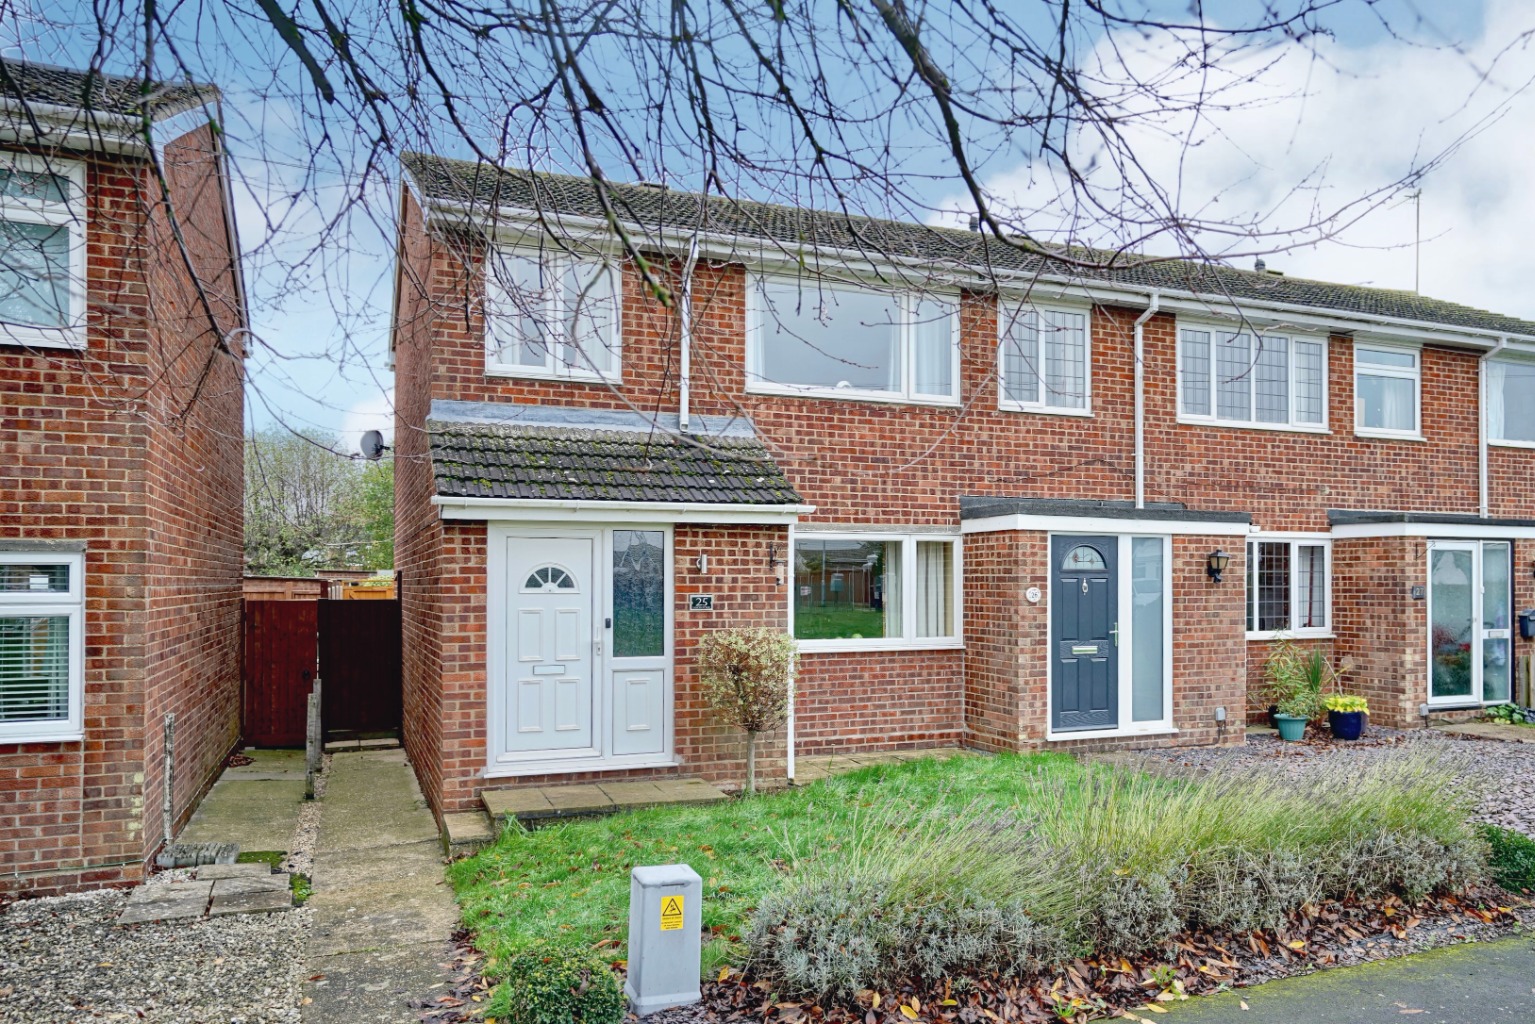 3 bed end of terrace house for sale in Lancelot Way, Huntingdon - Property Image 1